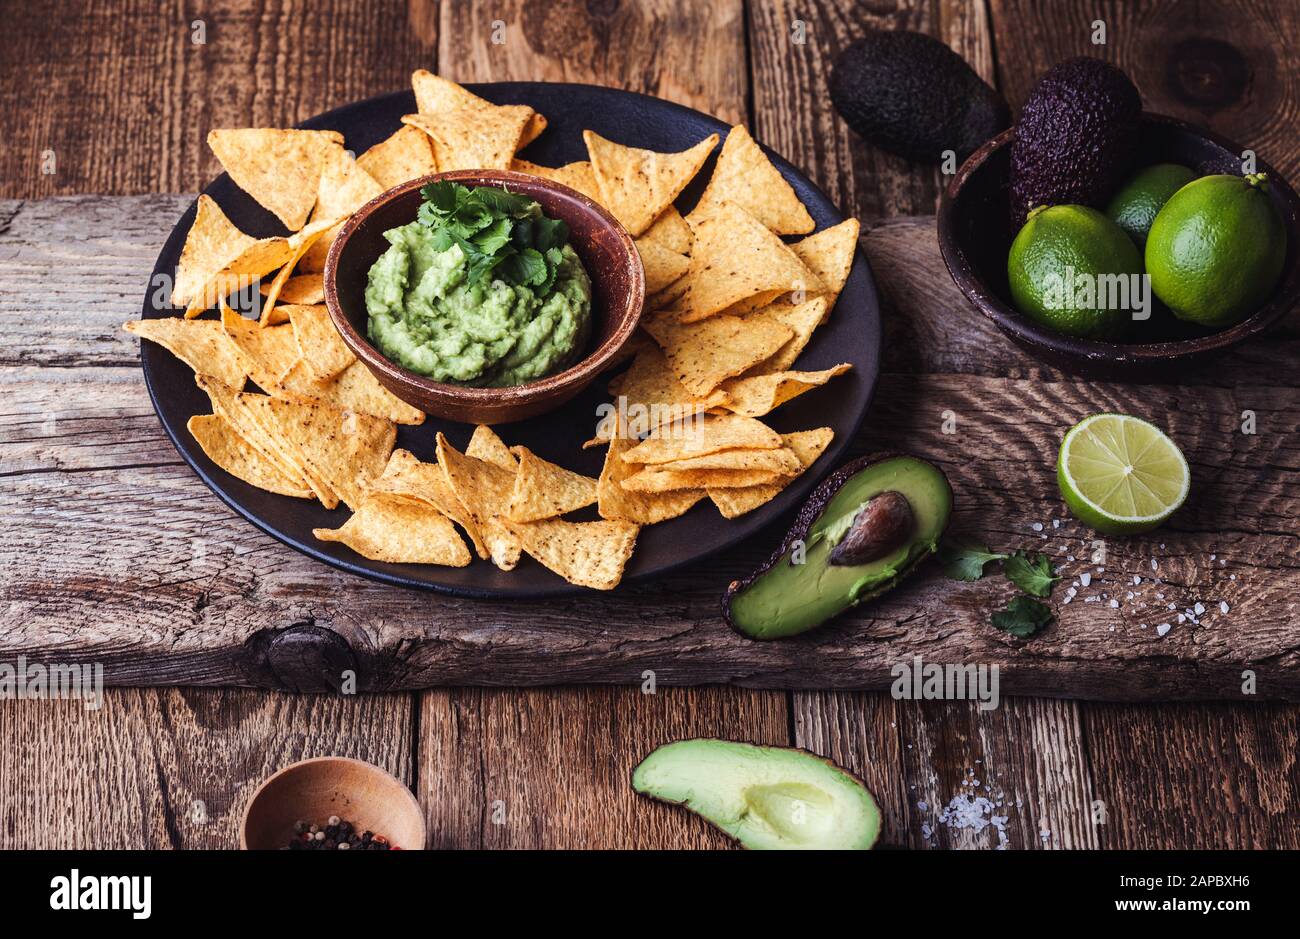 Mexican traditional food, guacamole sauce, ingredients  avocado, cilantro, lime and tortilla corn chips on wooden rural table. Preparing local food Stock Photo